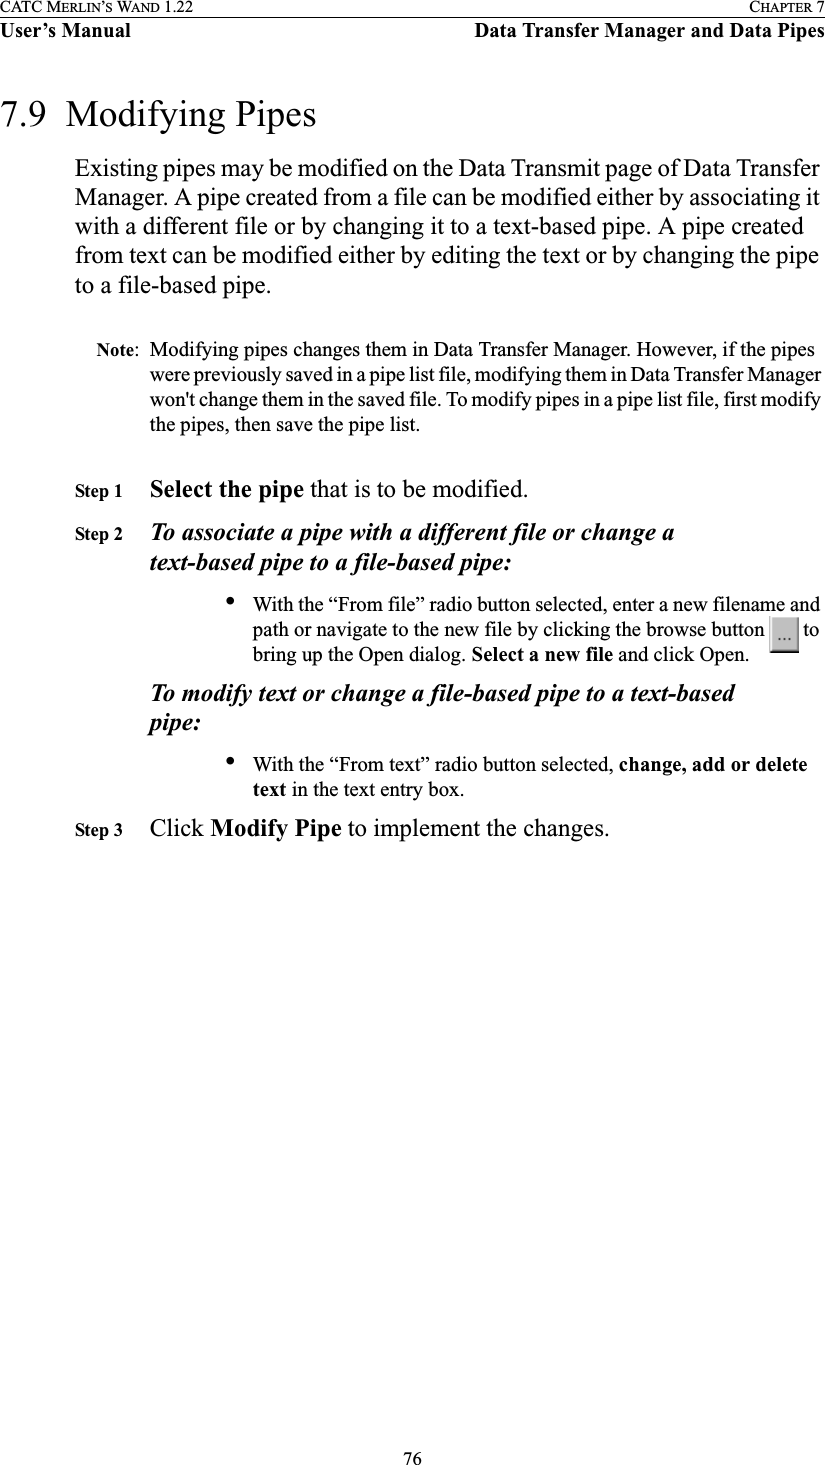 76CATC MERLIN’S WAND 1.22 CHAPTER 7User’s Manual Data Transfer Manager and Data Pipes7.9  Modifying PipesExisting pipes may be modified on the Data Transmit page of Data Transfer Manager. A pipe created from a file can be modified either by associating it with a different file or by changing it to a text-based pipe. A pipe created from text can be modified either by editing the text or by changing the pipe to a file-based pipe.Note: Modifying pipes changes them in Data Transfer Manager. However, if the pipes were previously saved in a pipe list file, modifying them in Data Transfer Manager won&apos;t change them in the saved file. To modify pipes in a pipe list file, first modify the pipes, then save the pipe list.Step 1 Select the pipe that is to be modified.Step 2 To associate a pipe with a different file or change a text-based pipe to a file-based pipe:•With the “From file” radio button selected, enter a new filename and path or navigate to the new file by clicking the browse button   to bring up the Open dialog. Select a new file and click Open.To modify text or change a file-based pipe to a text-based pipe:•With the “From text” radio button selected, change, add or delete text in the text entry box.Step 3 Click Modify Pipe to implement the changes.